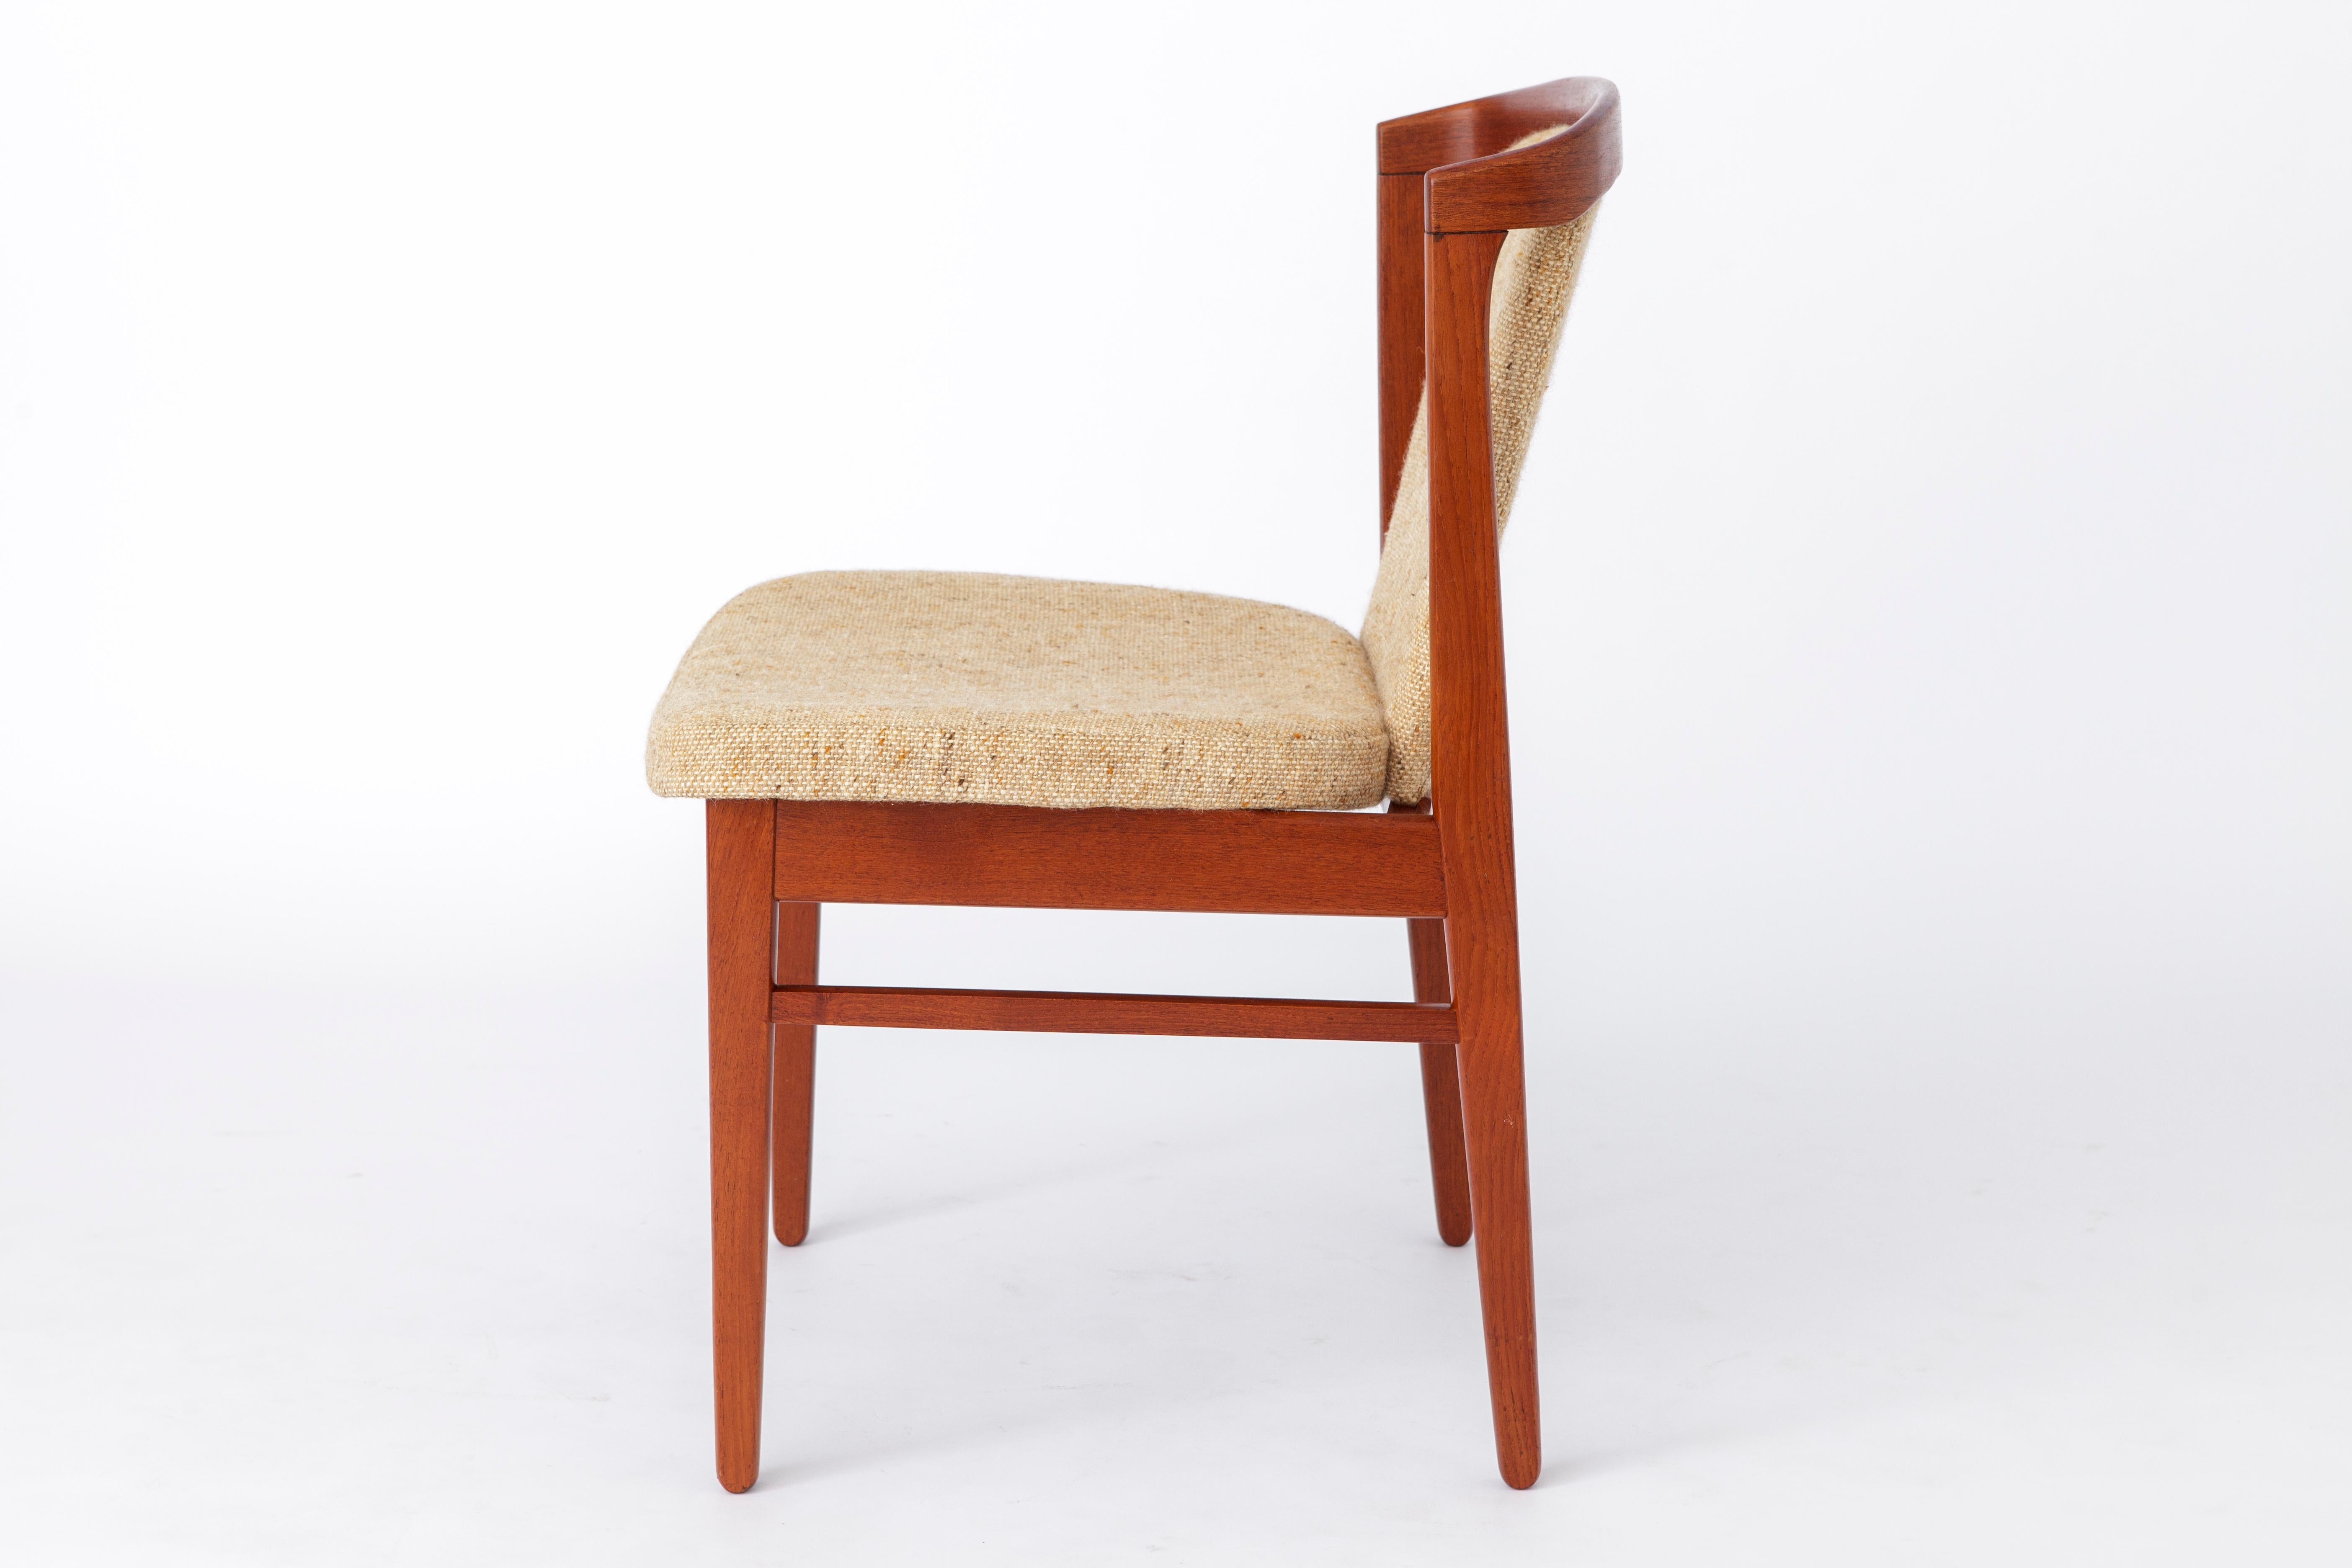 Polished Vintage Chair by Erik Buch for Orum Mobler, 1960s Denmark